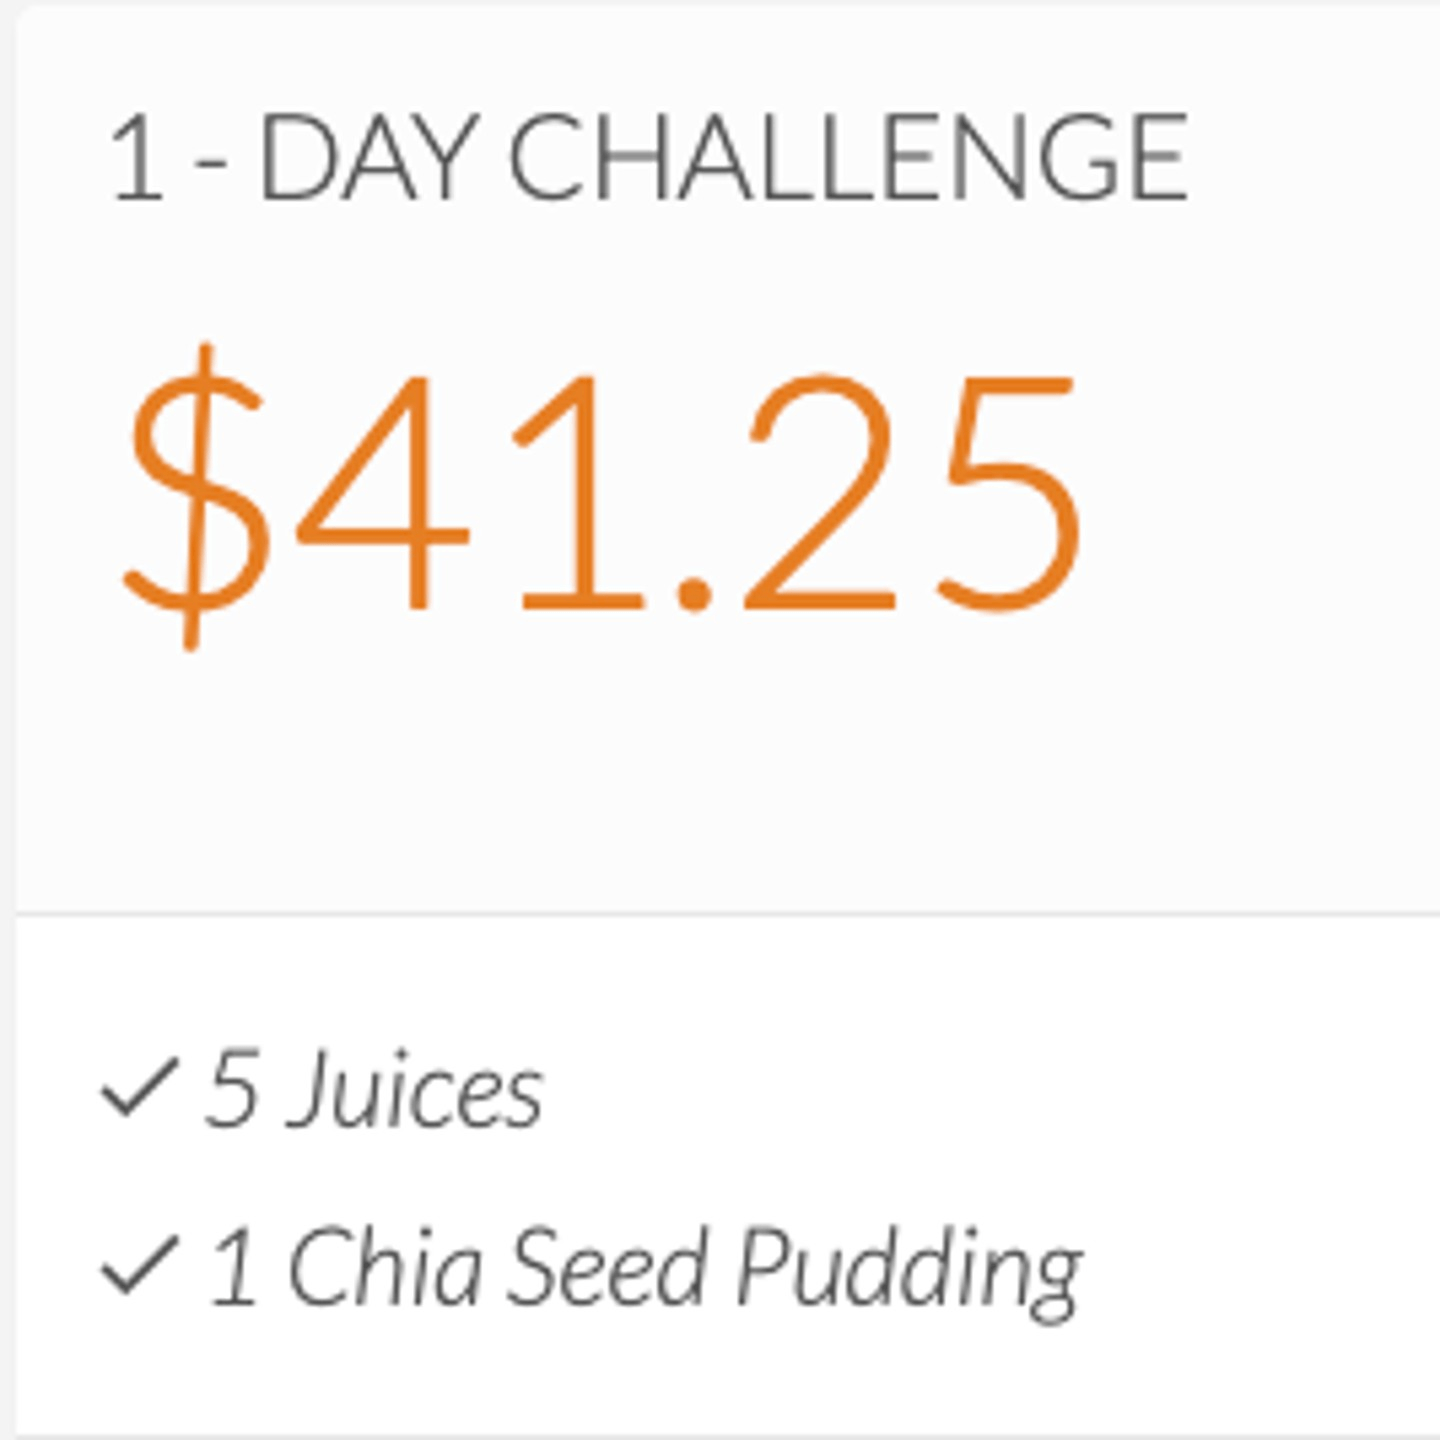 1 Day Challenge Package: